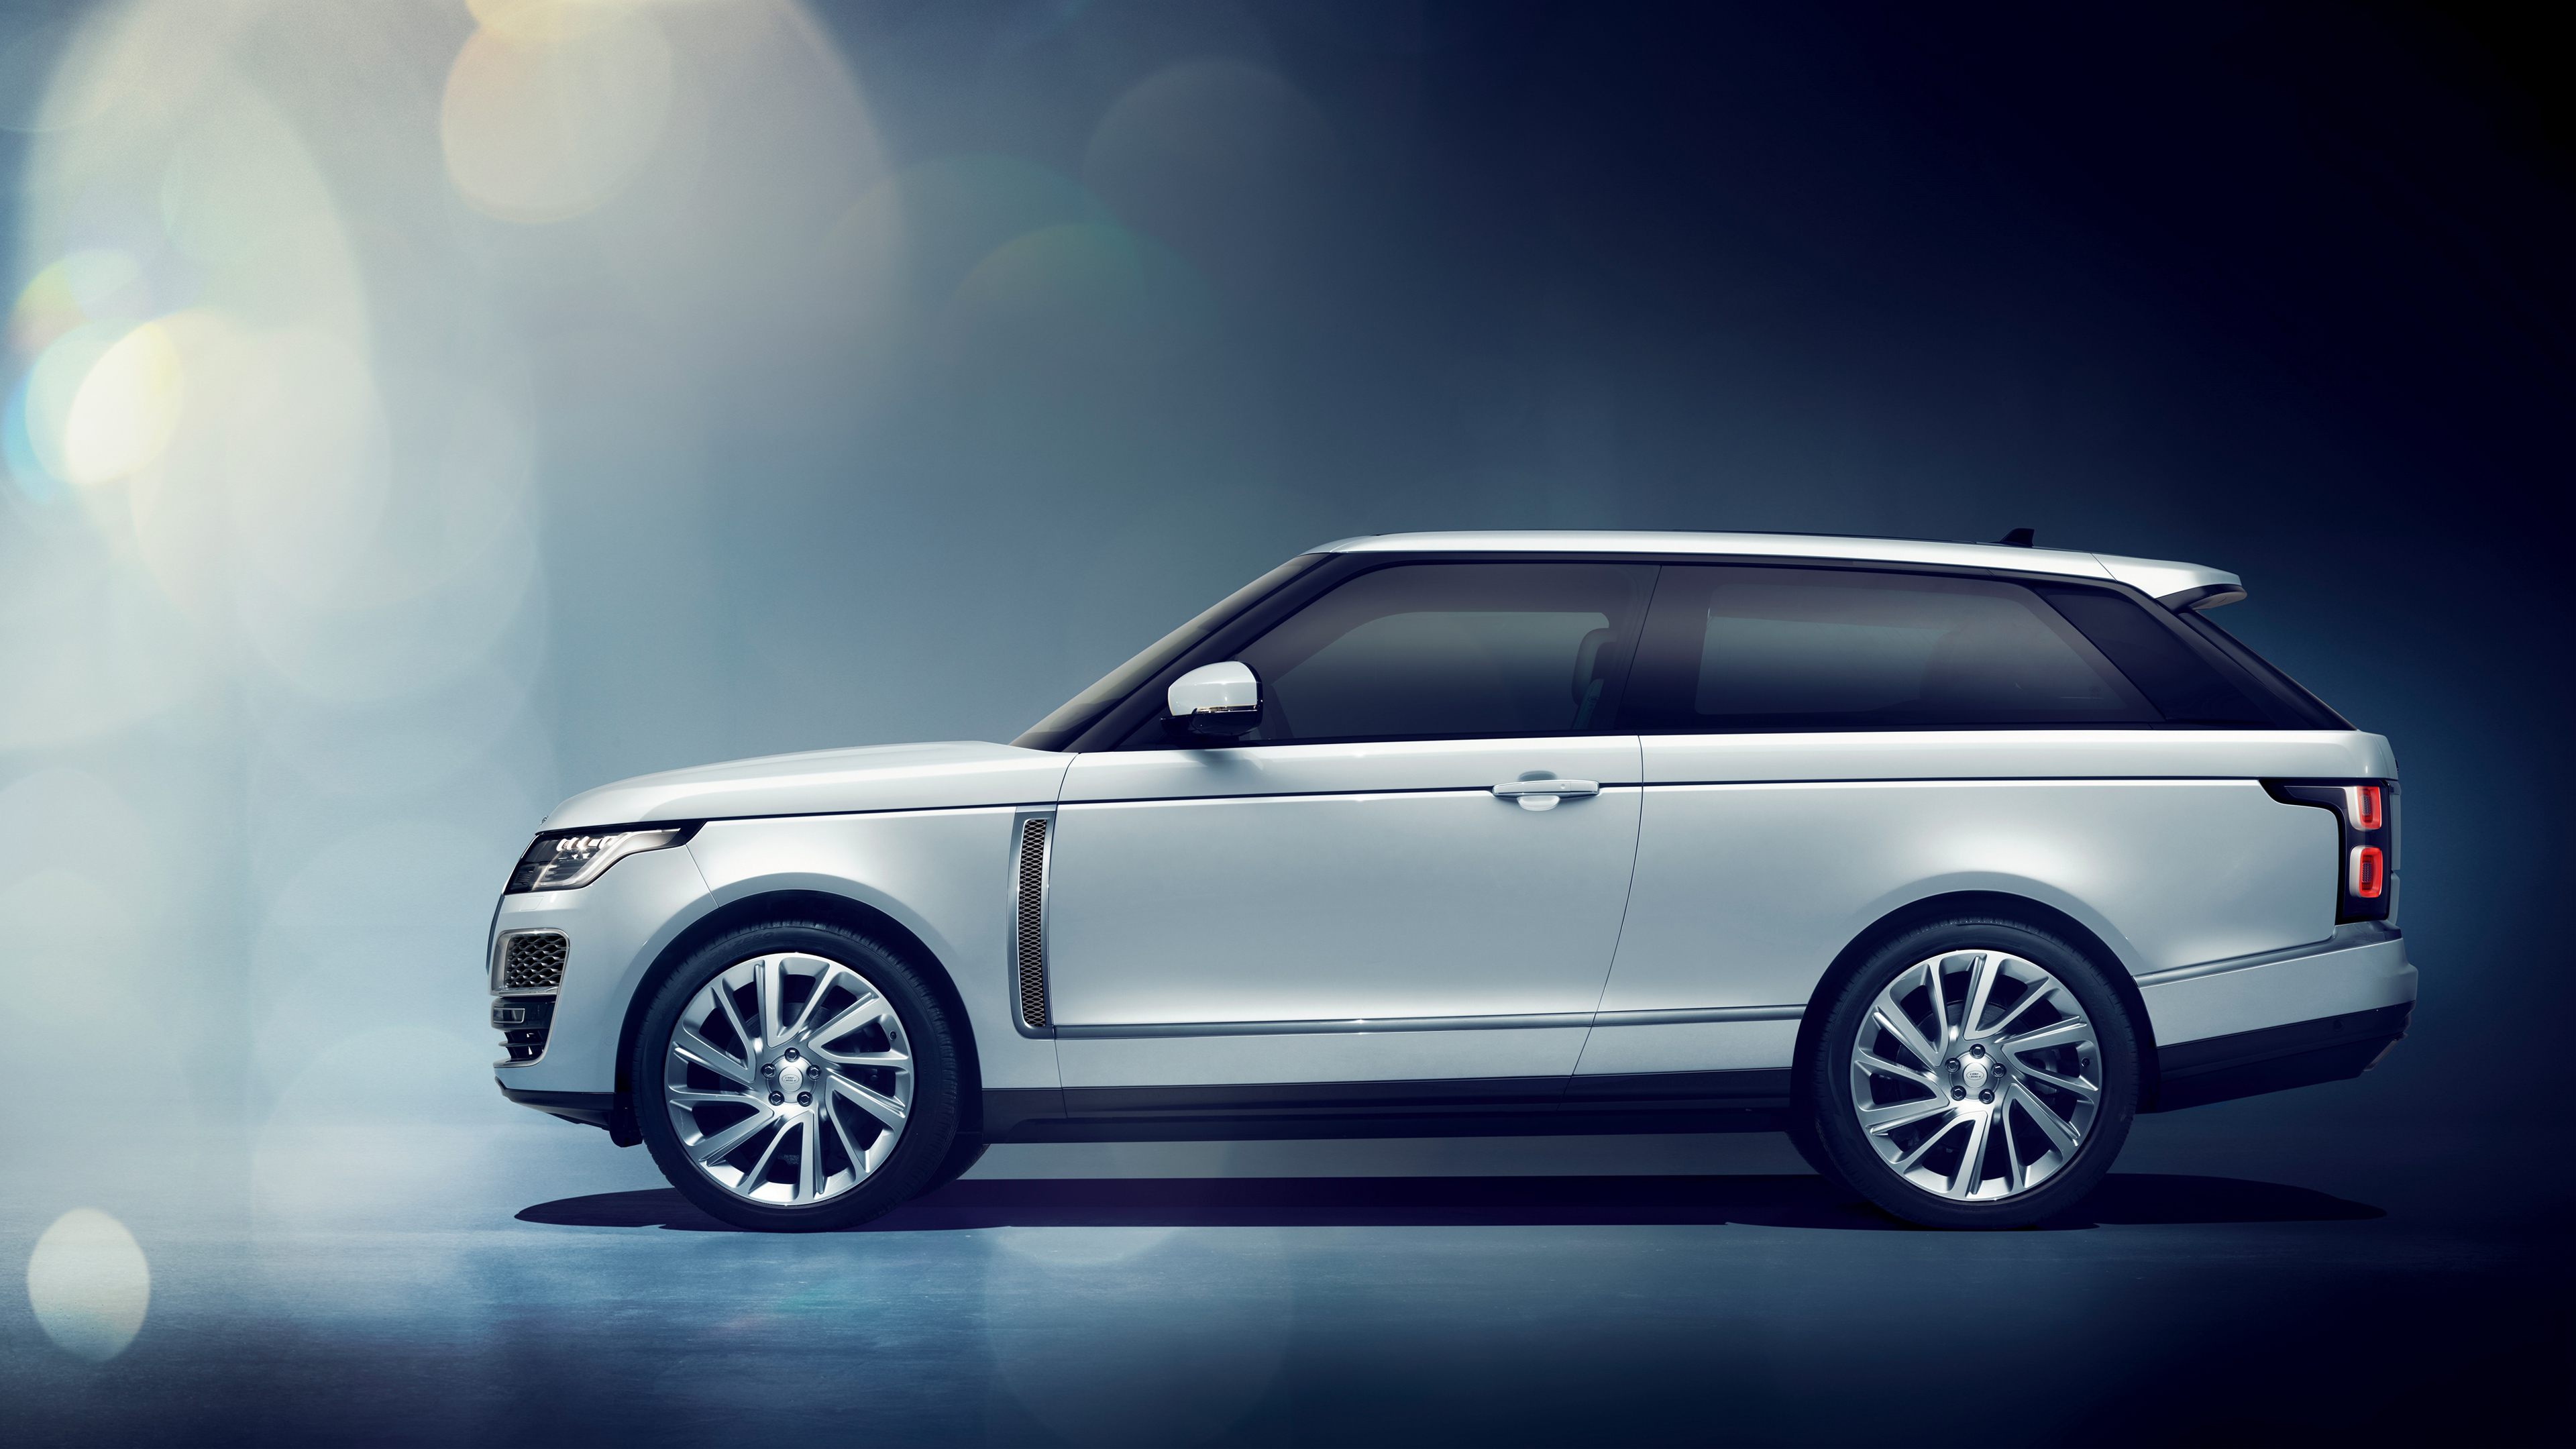 2018 Range Rover SV Coupe 4K Wallpaper | HD Car Wallpapers | ID #9709